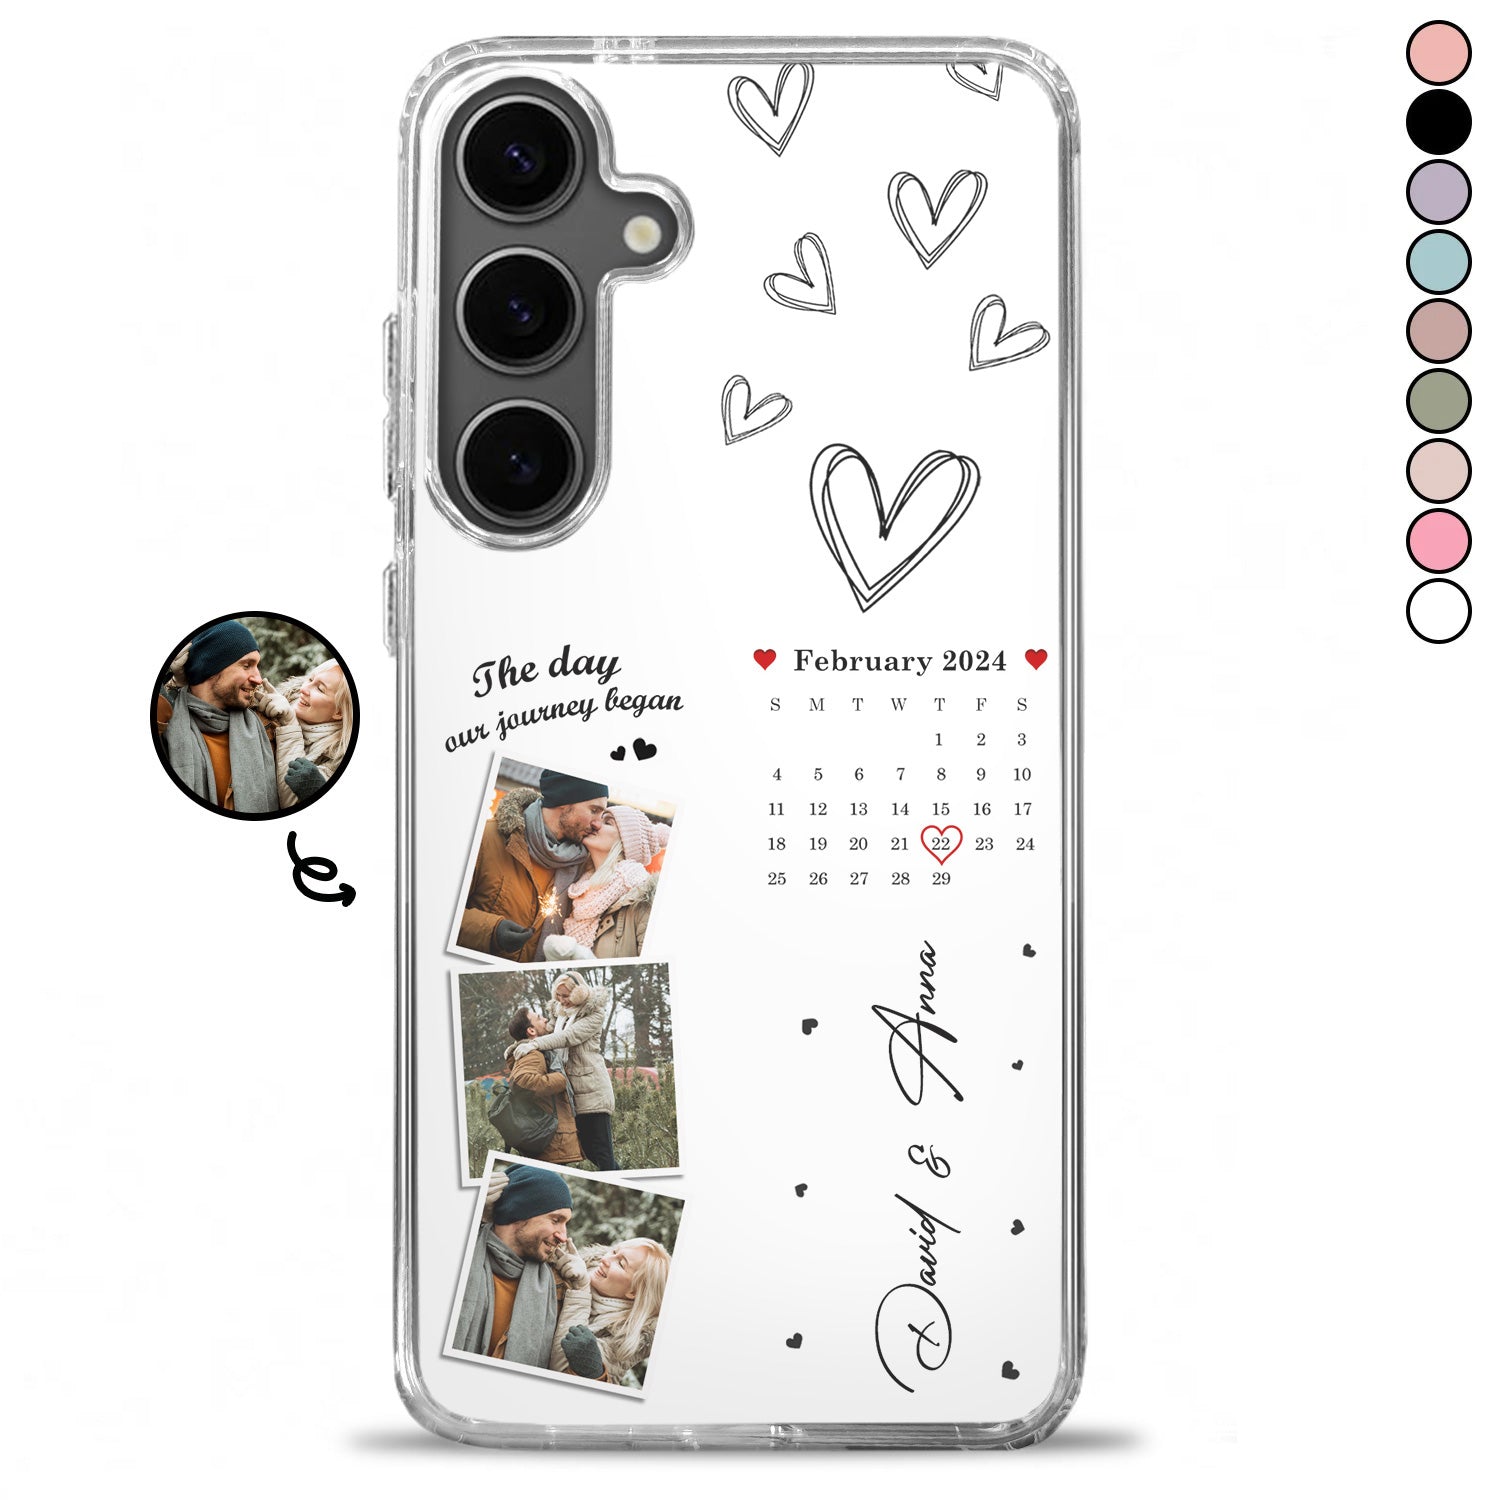 Custom Photo Calendar The Day Our Journey Began Version 2 - Gift For Couples - Personalized Clear Phone Case